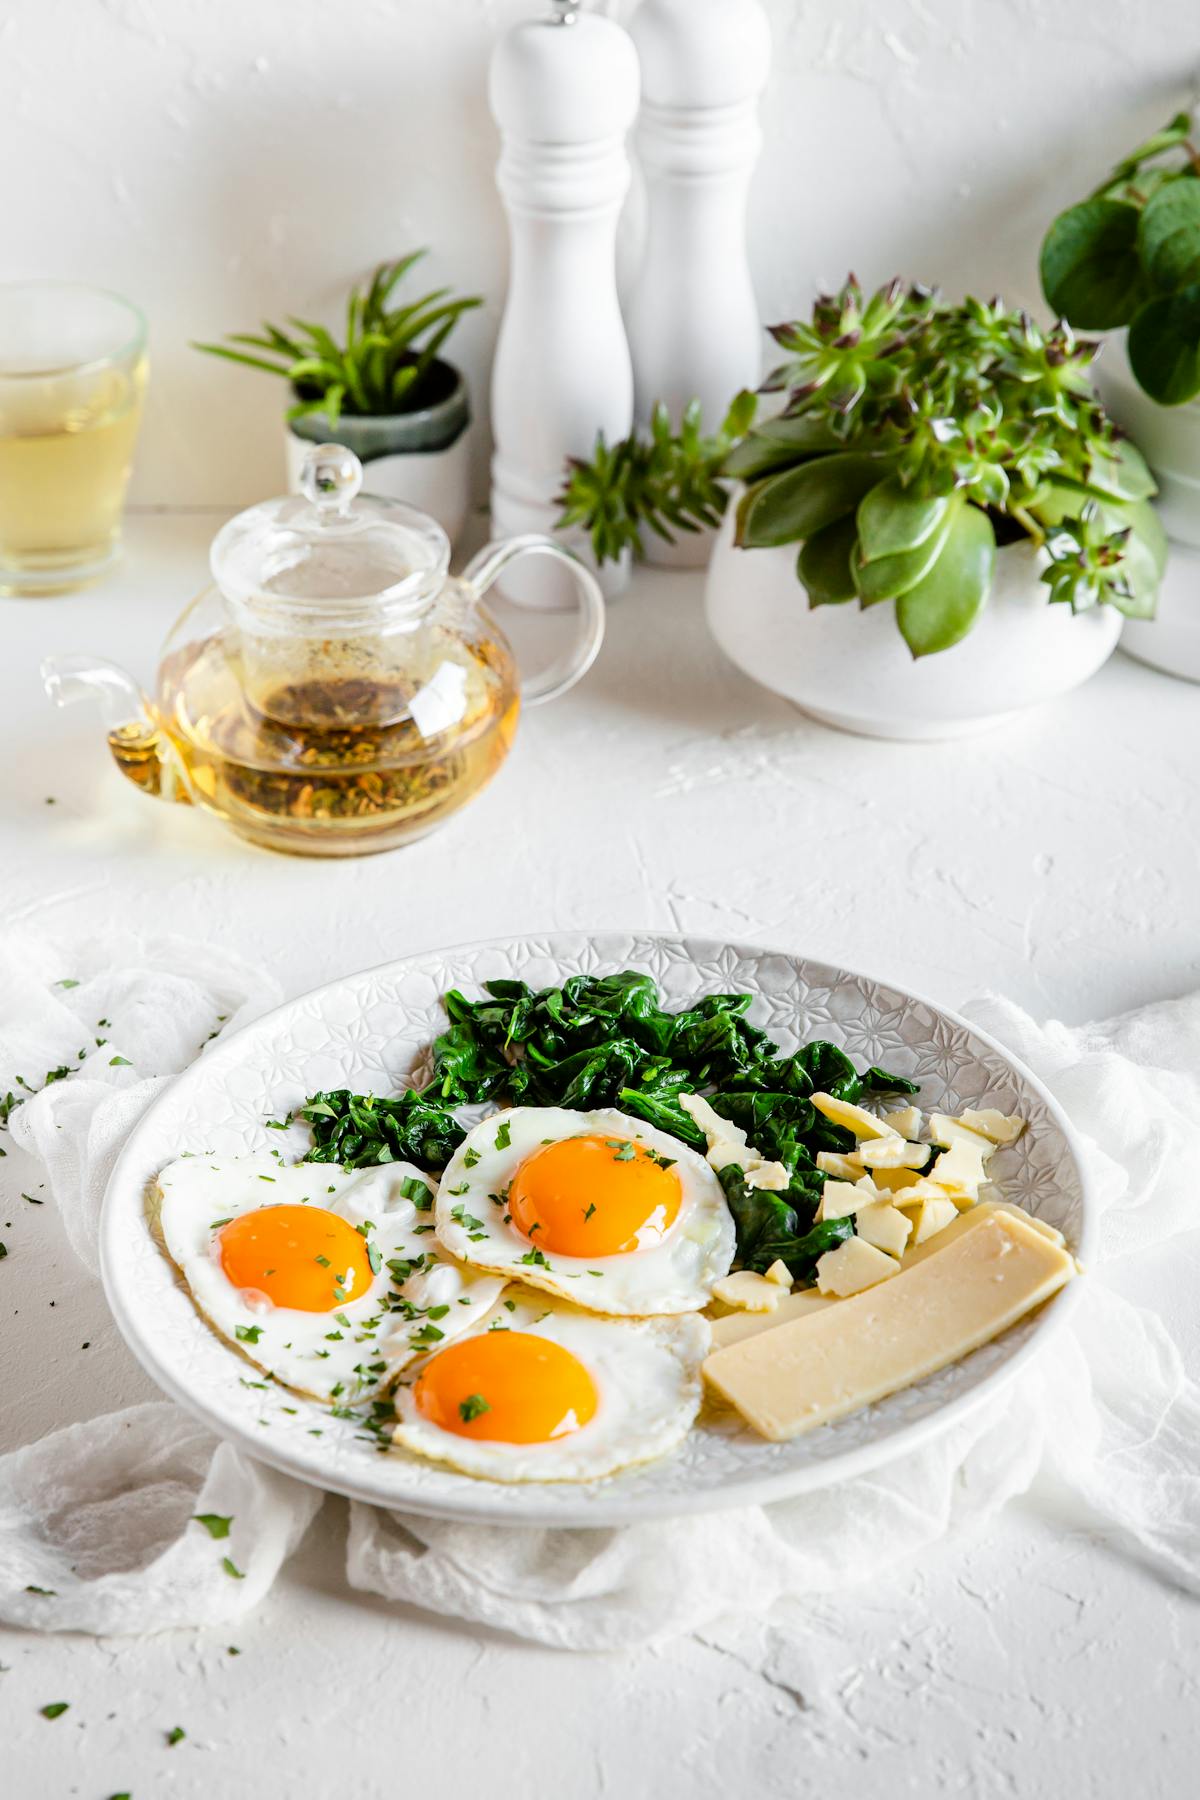 High-protein vegetarian breakfast with cheese, eggs and spinach